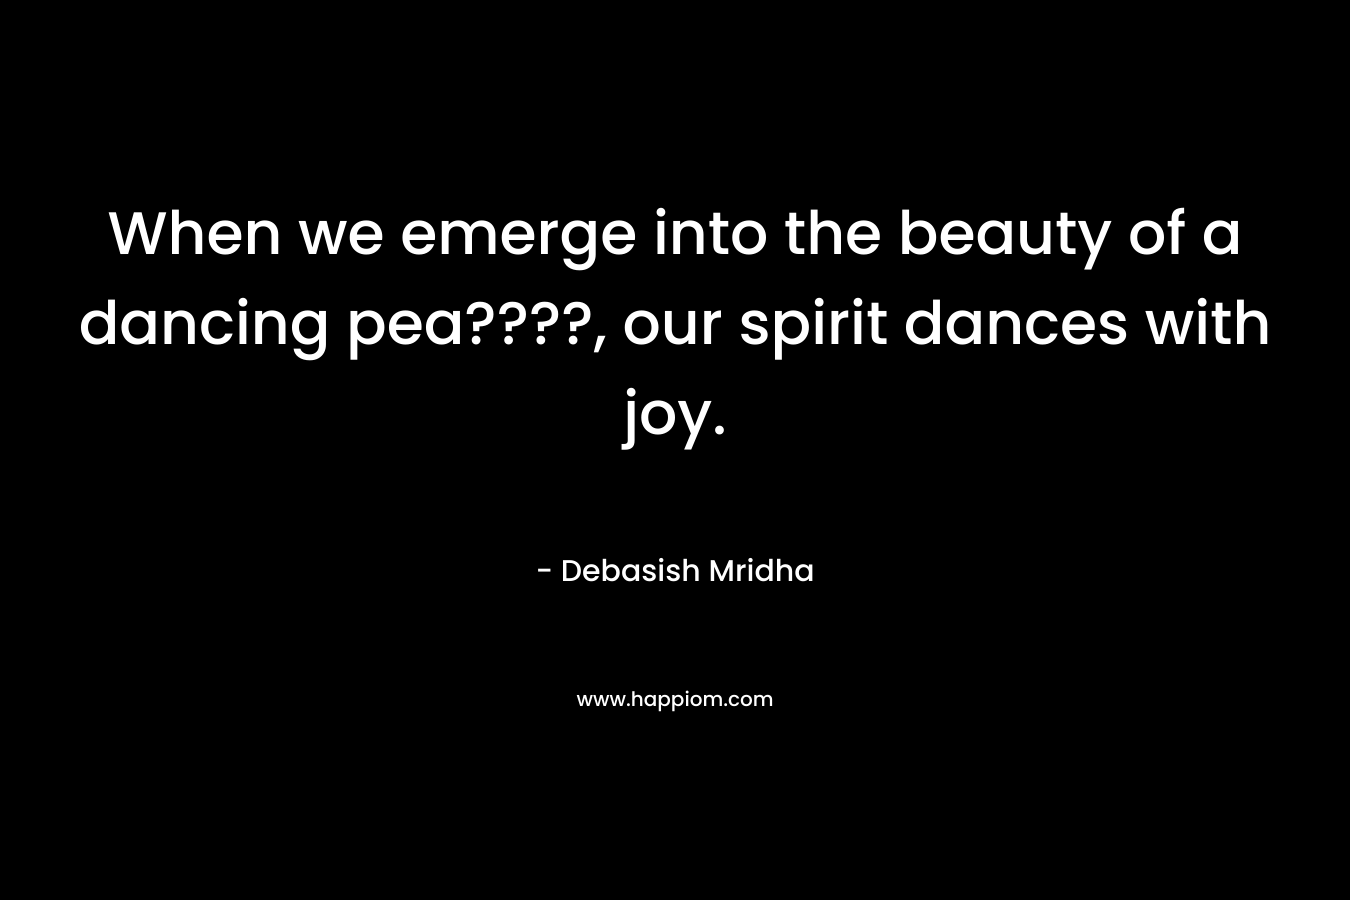 When we emerge into the beauty of a dancing pea????, our spirit dances with joy.